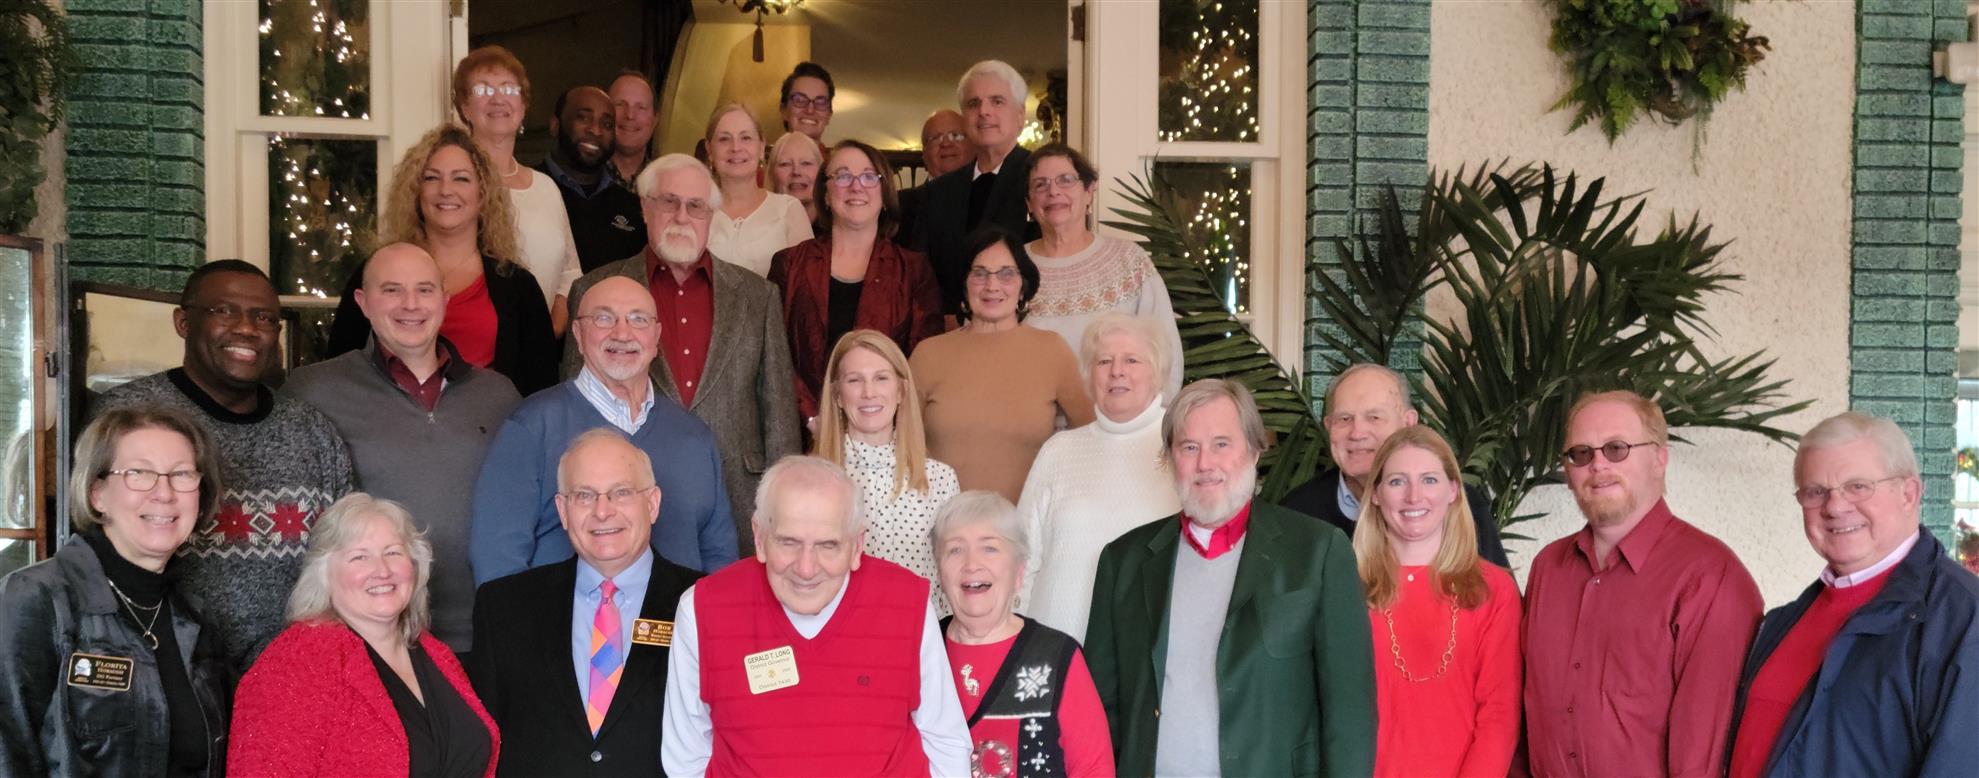 Members Celebrate the Holidays at Hotel B.